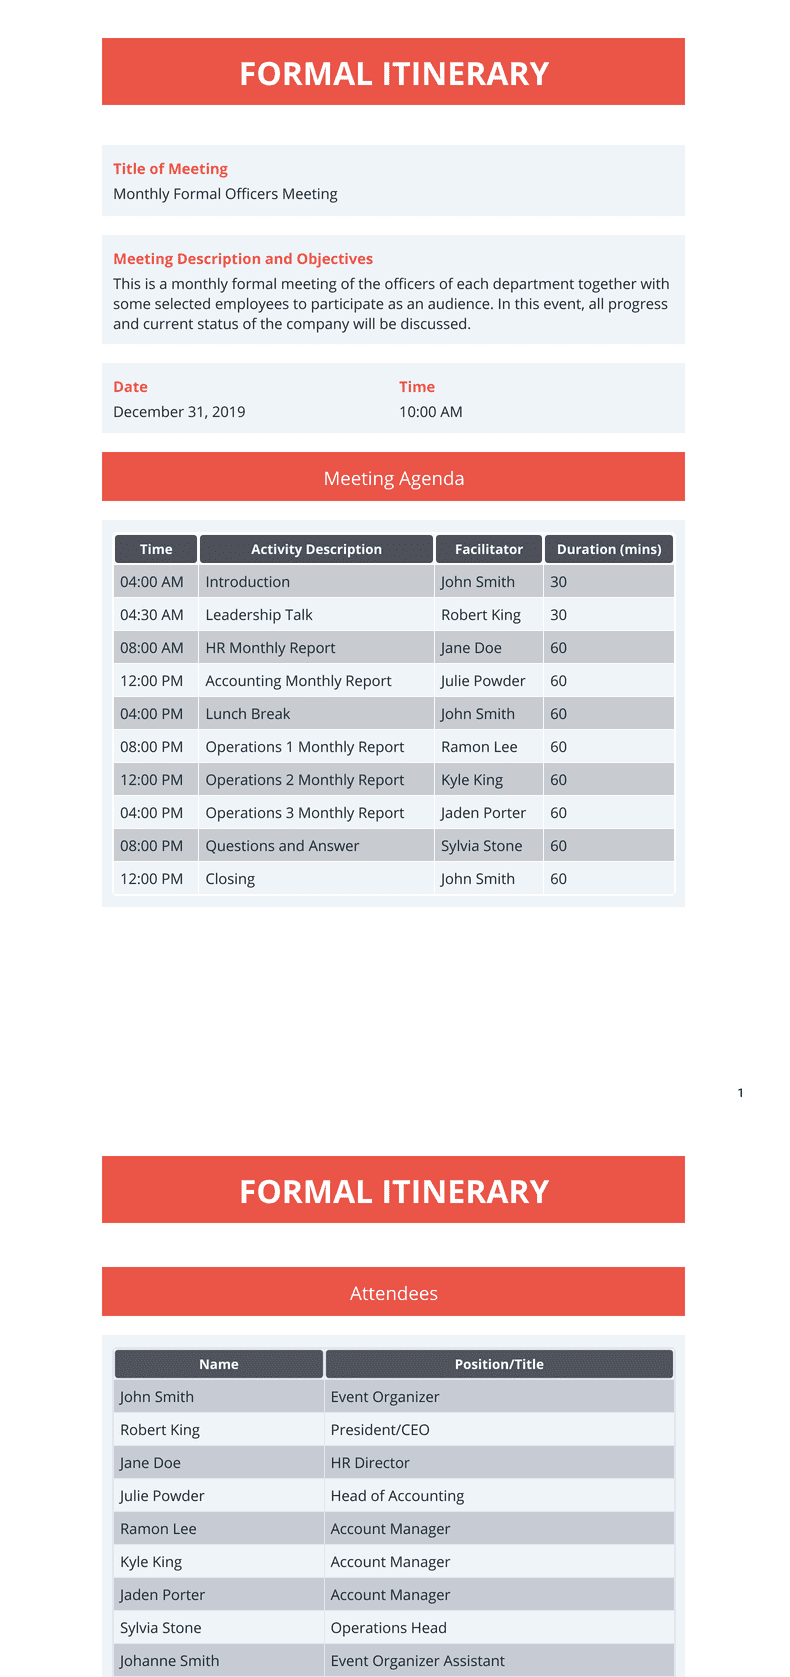 Formal Itinerary Template